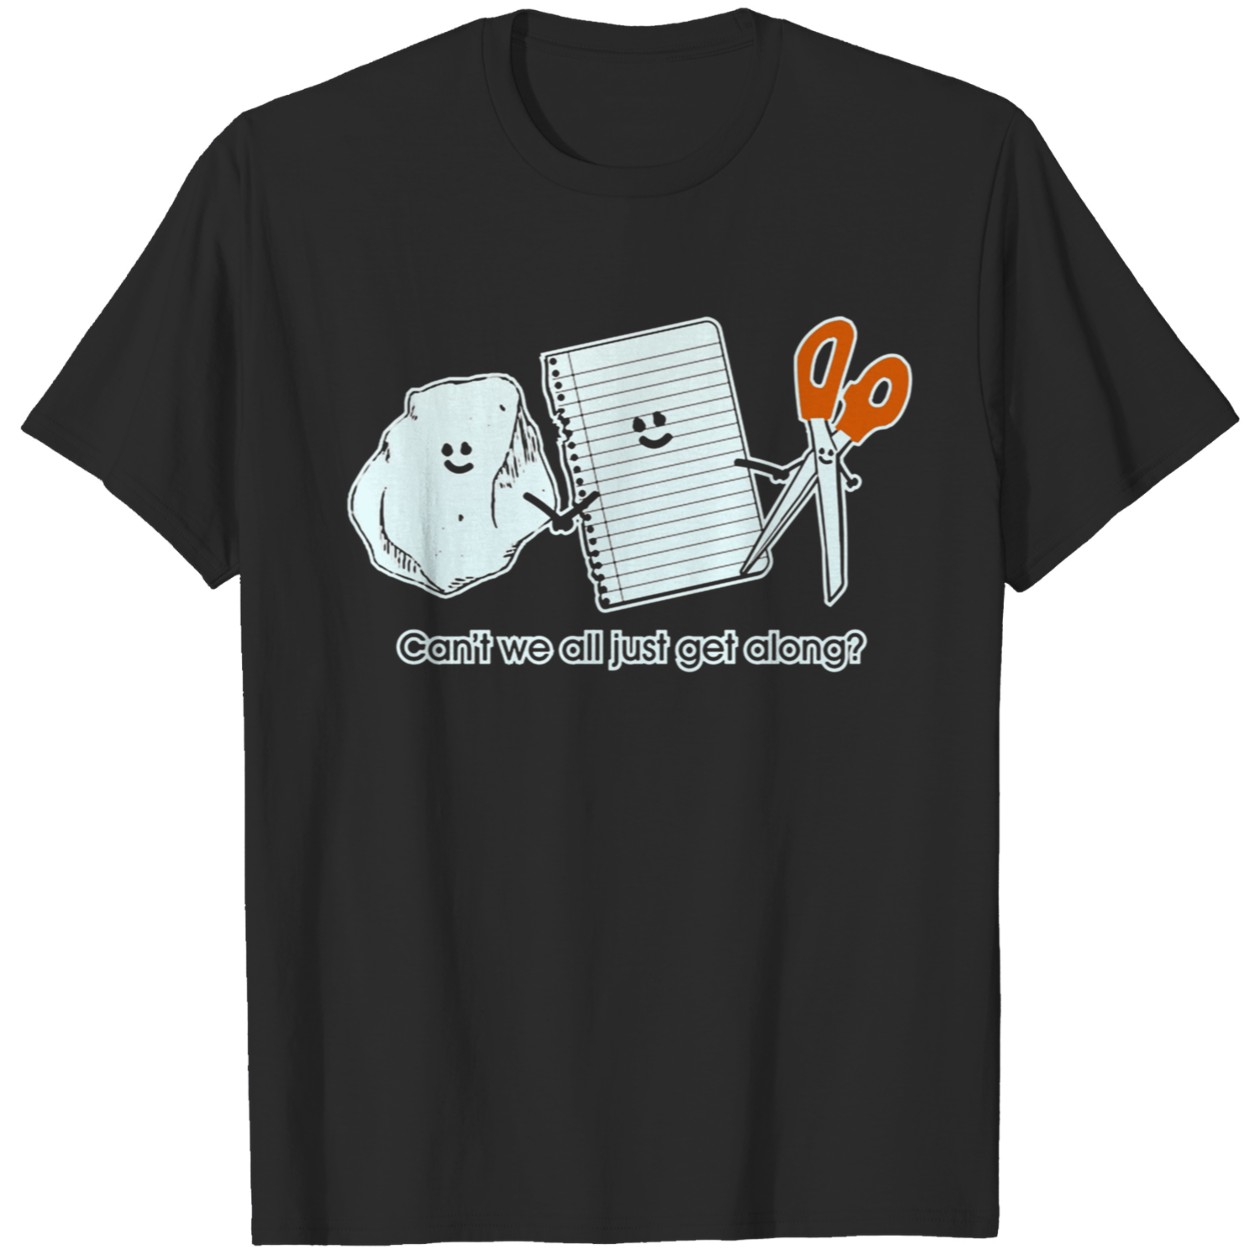 Can’t We All Just Get Along T-Shirt HE786 New Product